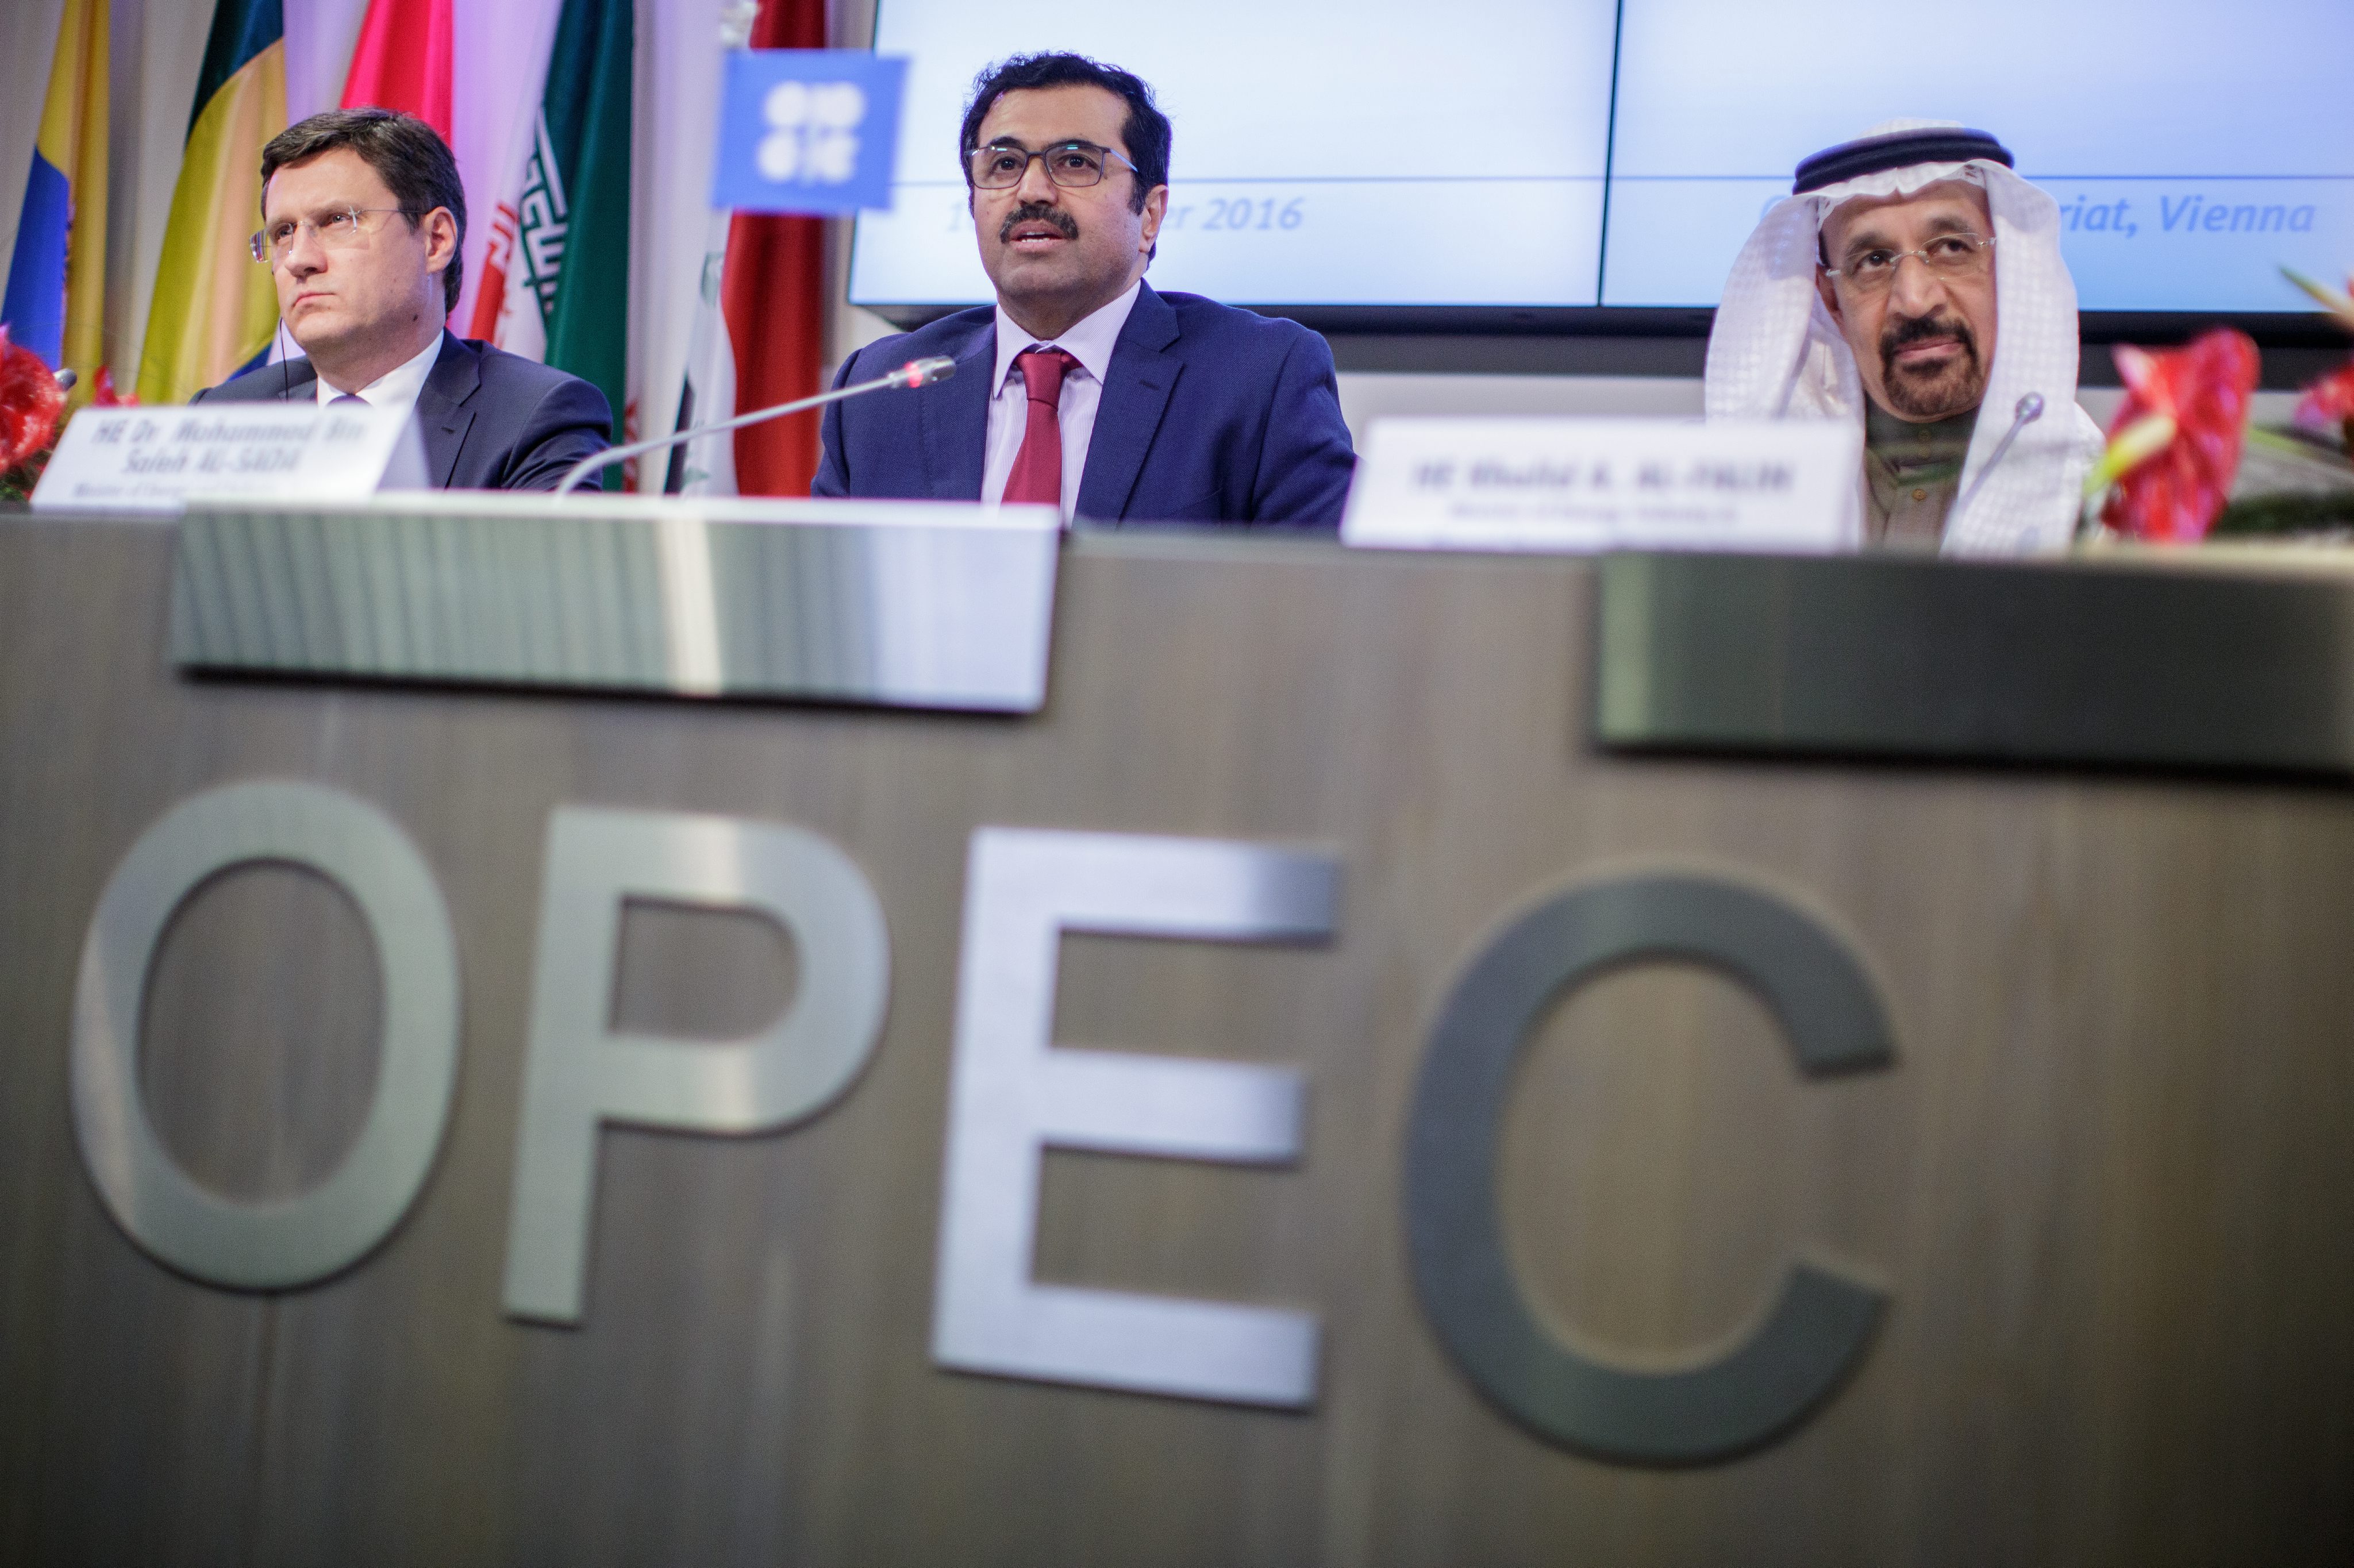 2016-12-10 13:15:13 epa05669461 Mohammed Al-Sada, Qatar's minister of energy and industry and president of OPEC (C), Khalid Al-Falih, Saudi Arabia's energy and industry minister (R), and Alexander Novak, Russia's energy minister (L) during a news conference after a meeting between the Organization of the Petroleum Exporting Countries (OPEC) and 12 non-OPEC member coutries in Vienna, Austria, 10 December 2016. A group of 12 non-OPEC member countries agreed in Vienna to withdraw about 0.6 million barrels per day of crude during a meeting with 13 members of the organization, Iran's minister of petroleum, Bijan Namdar Zangeneh, confirmed. A total of 25 nations responsible for the production of 60 percent of the world's crude were represented at the meeting. EPA/LISI NIESNER EPA/LISI NIESNER